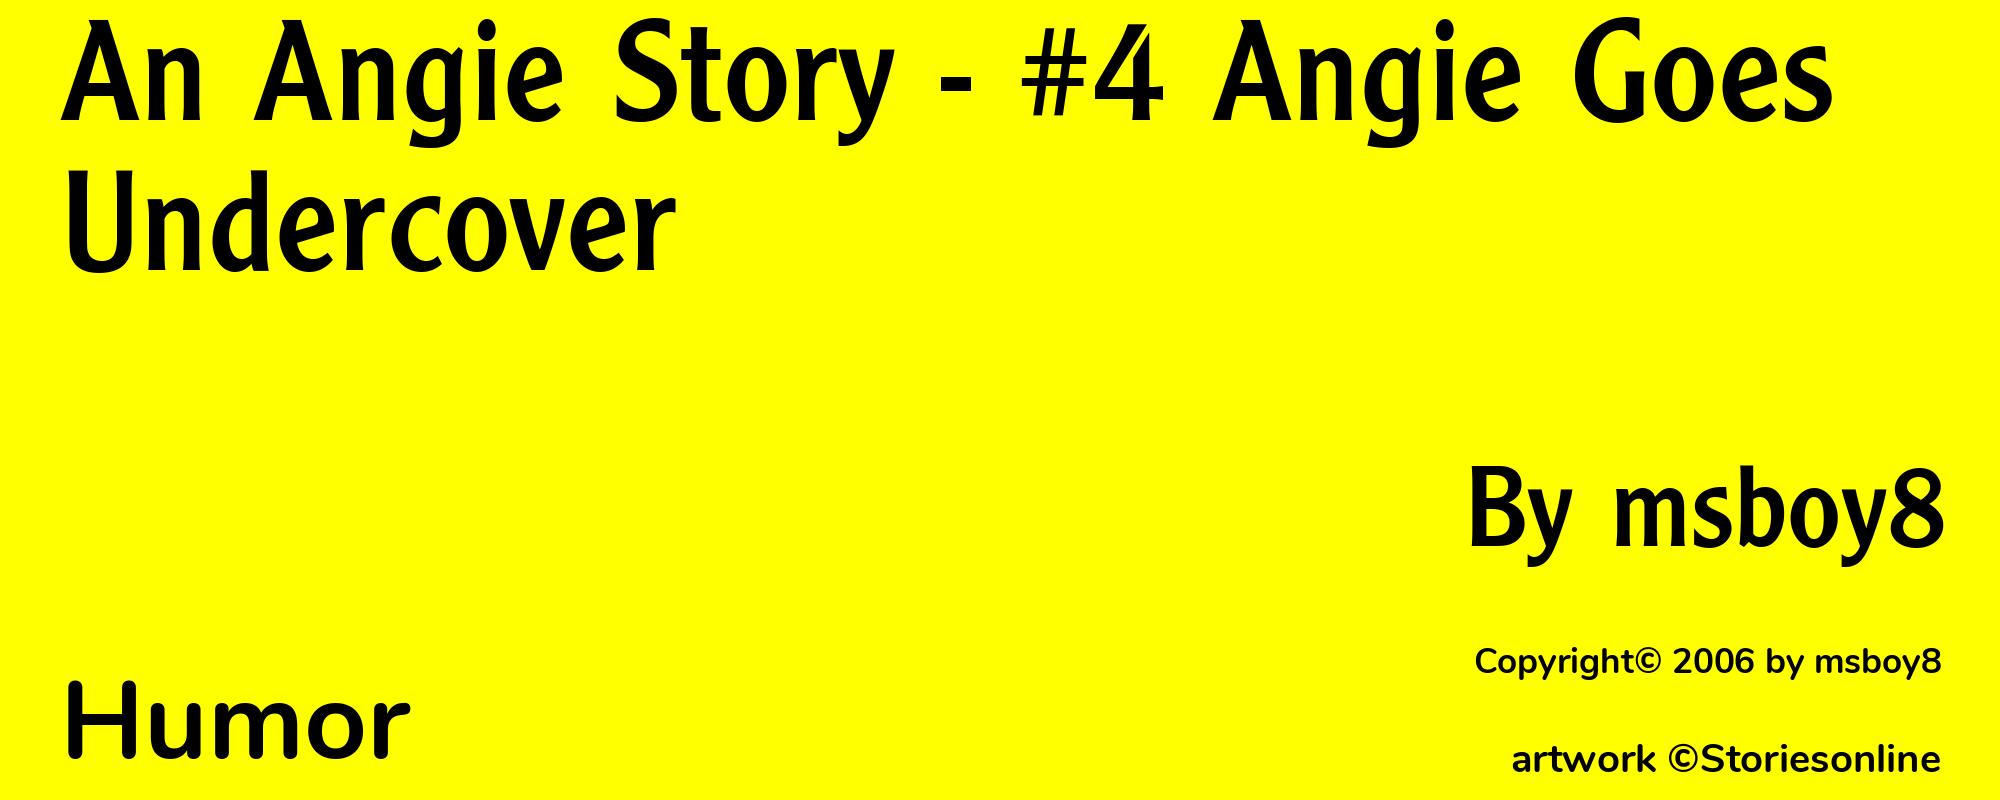 An Angie Story - #4 Angie Goes Undercover - Cover